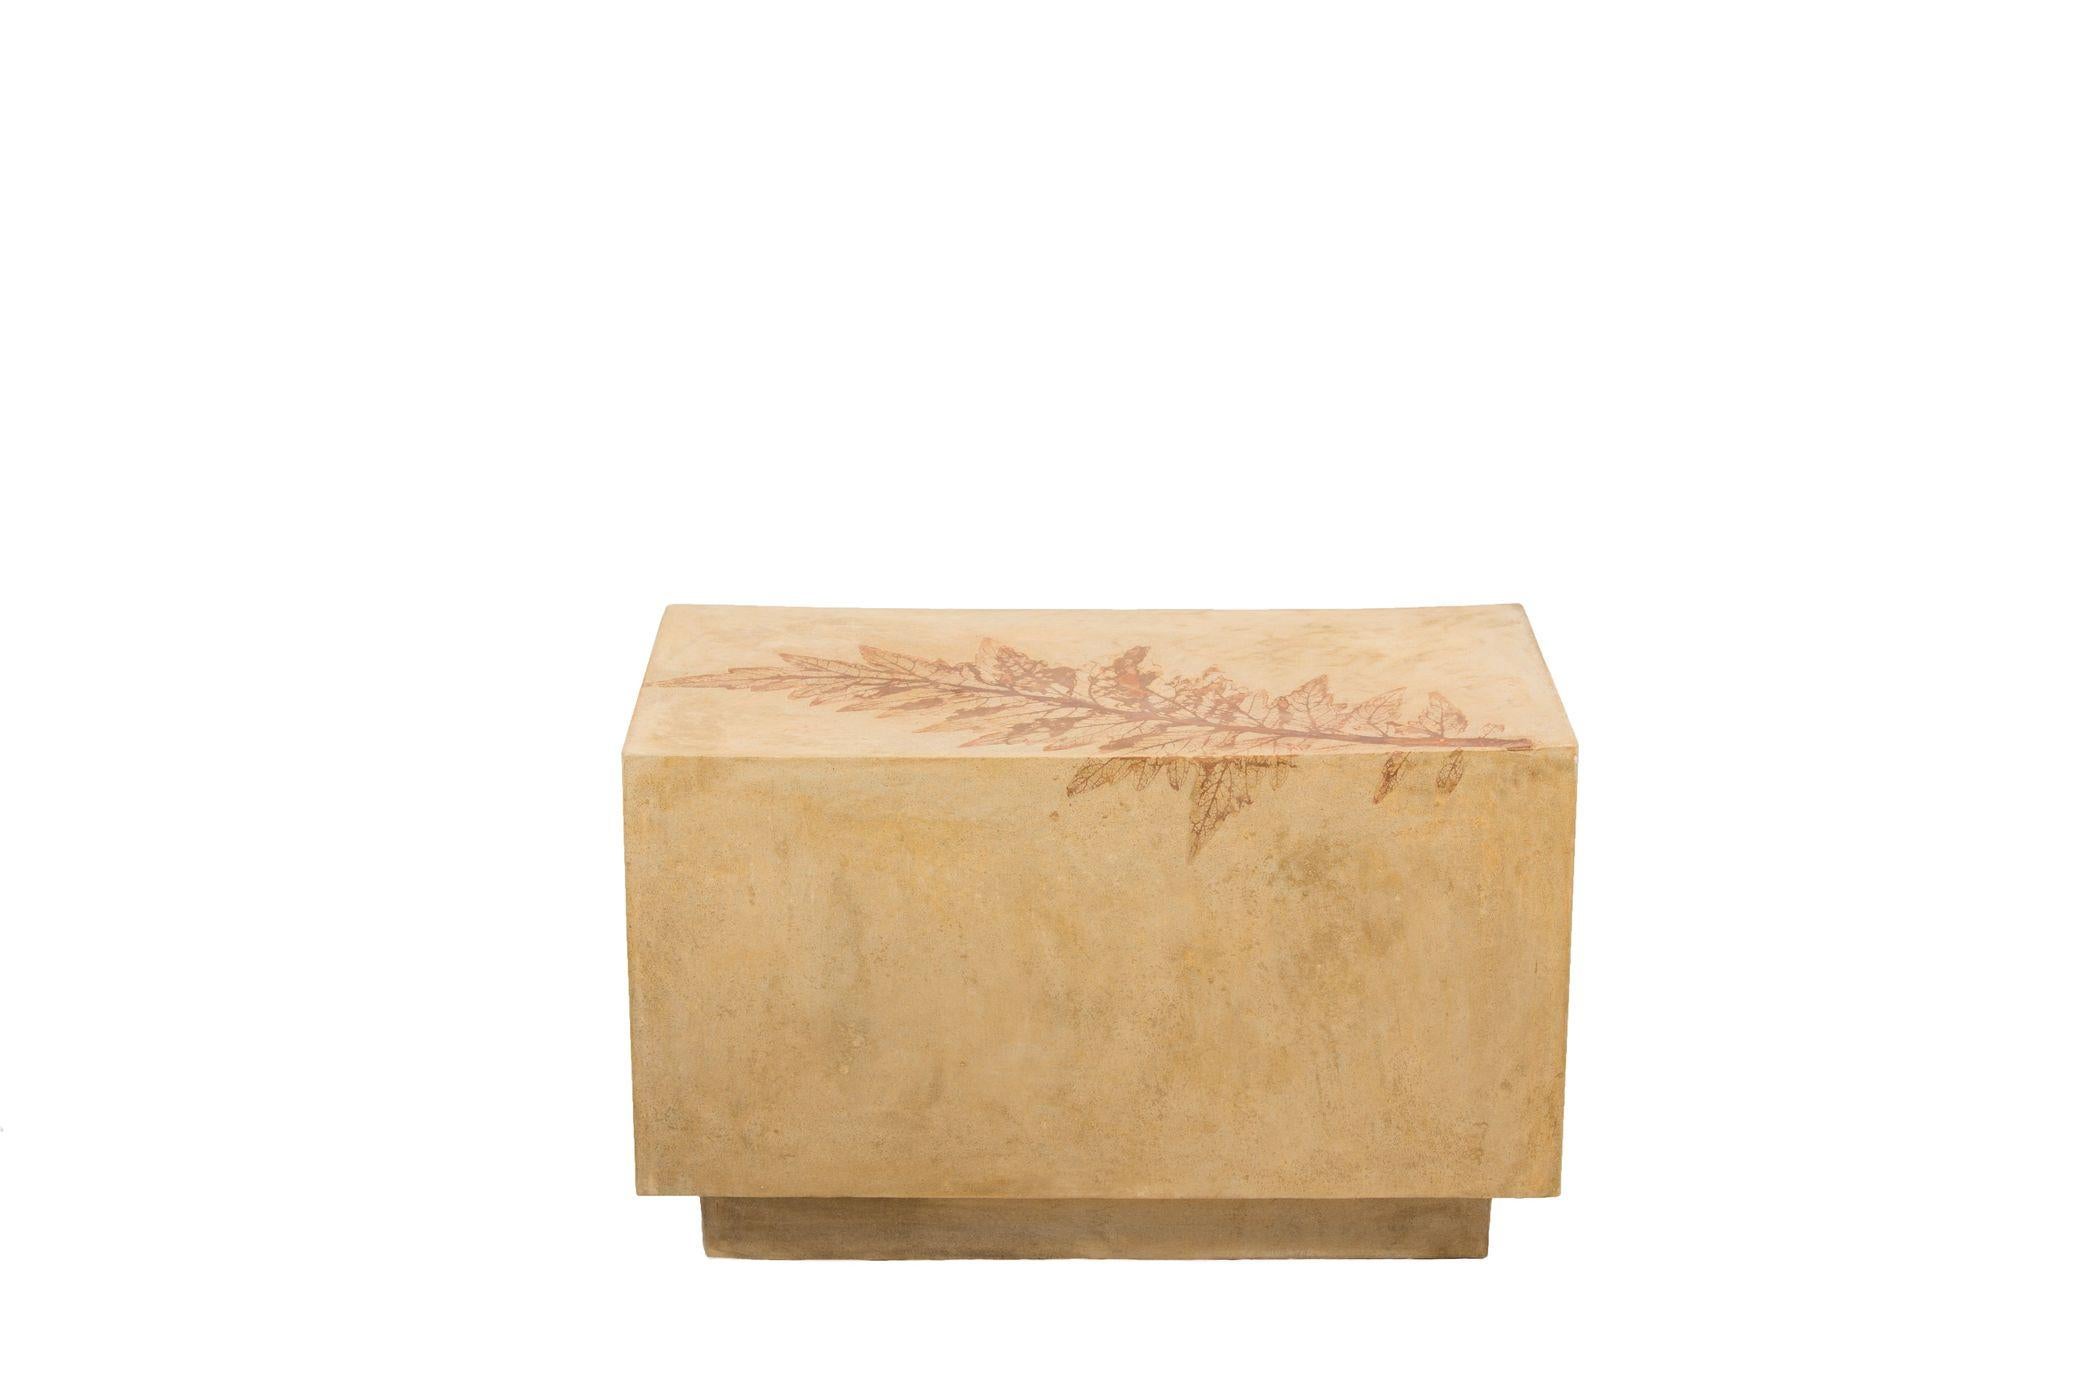 These customizable mid-weight concrete benches or coffee tables with or without impressions from real leaves can make a natural addition to nearly any room or outdoor environment.

The fossil-like leaf imprints soften the brutalist material of